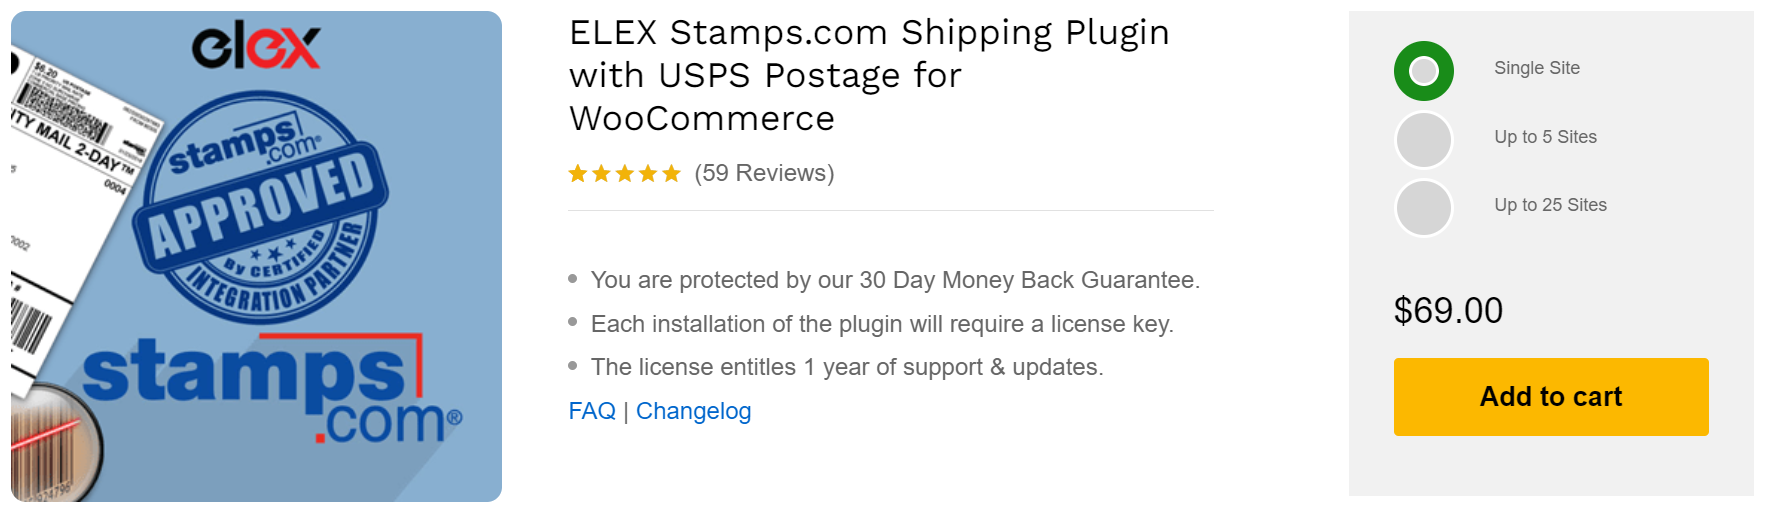 ELEX Stamps.com Plugin for shipping with USPS Postage